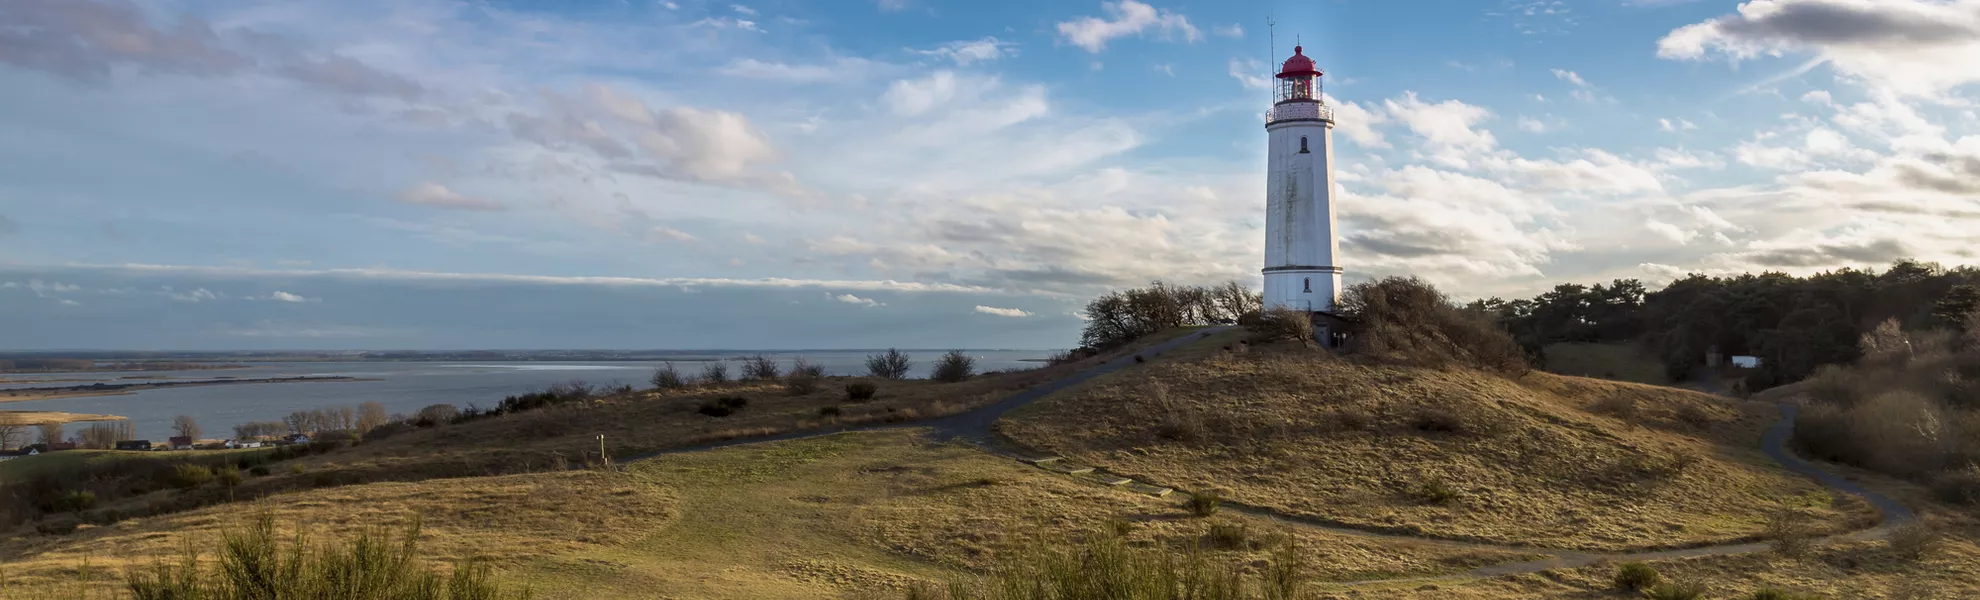 Hiddensee - © Getty Images/iStockphoto